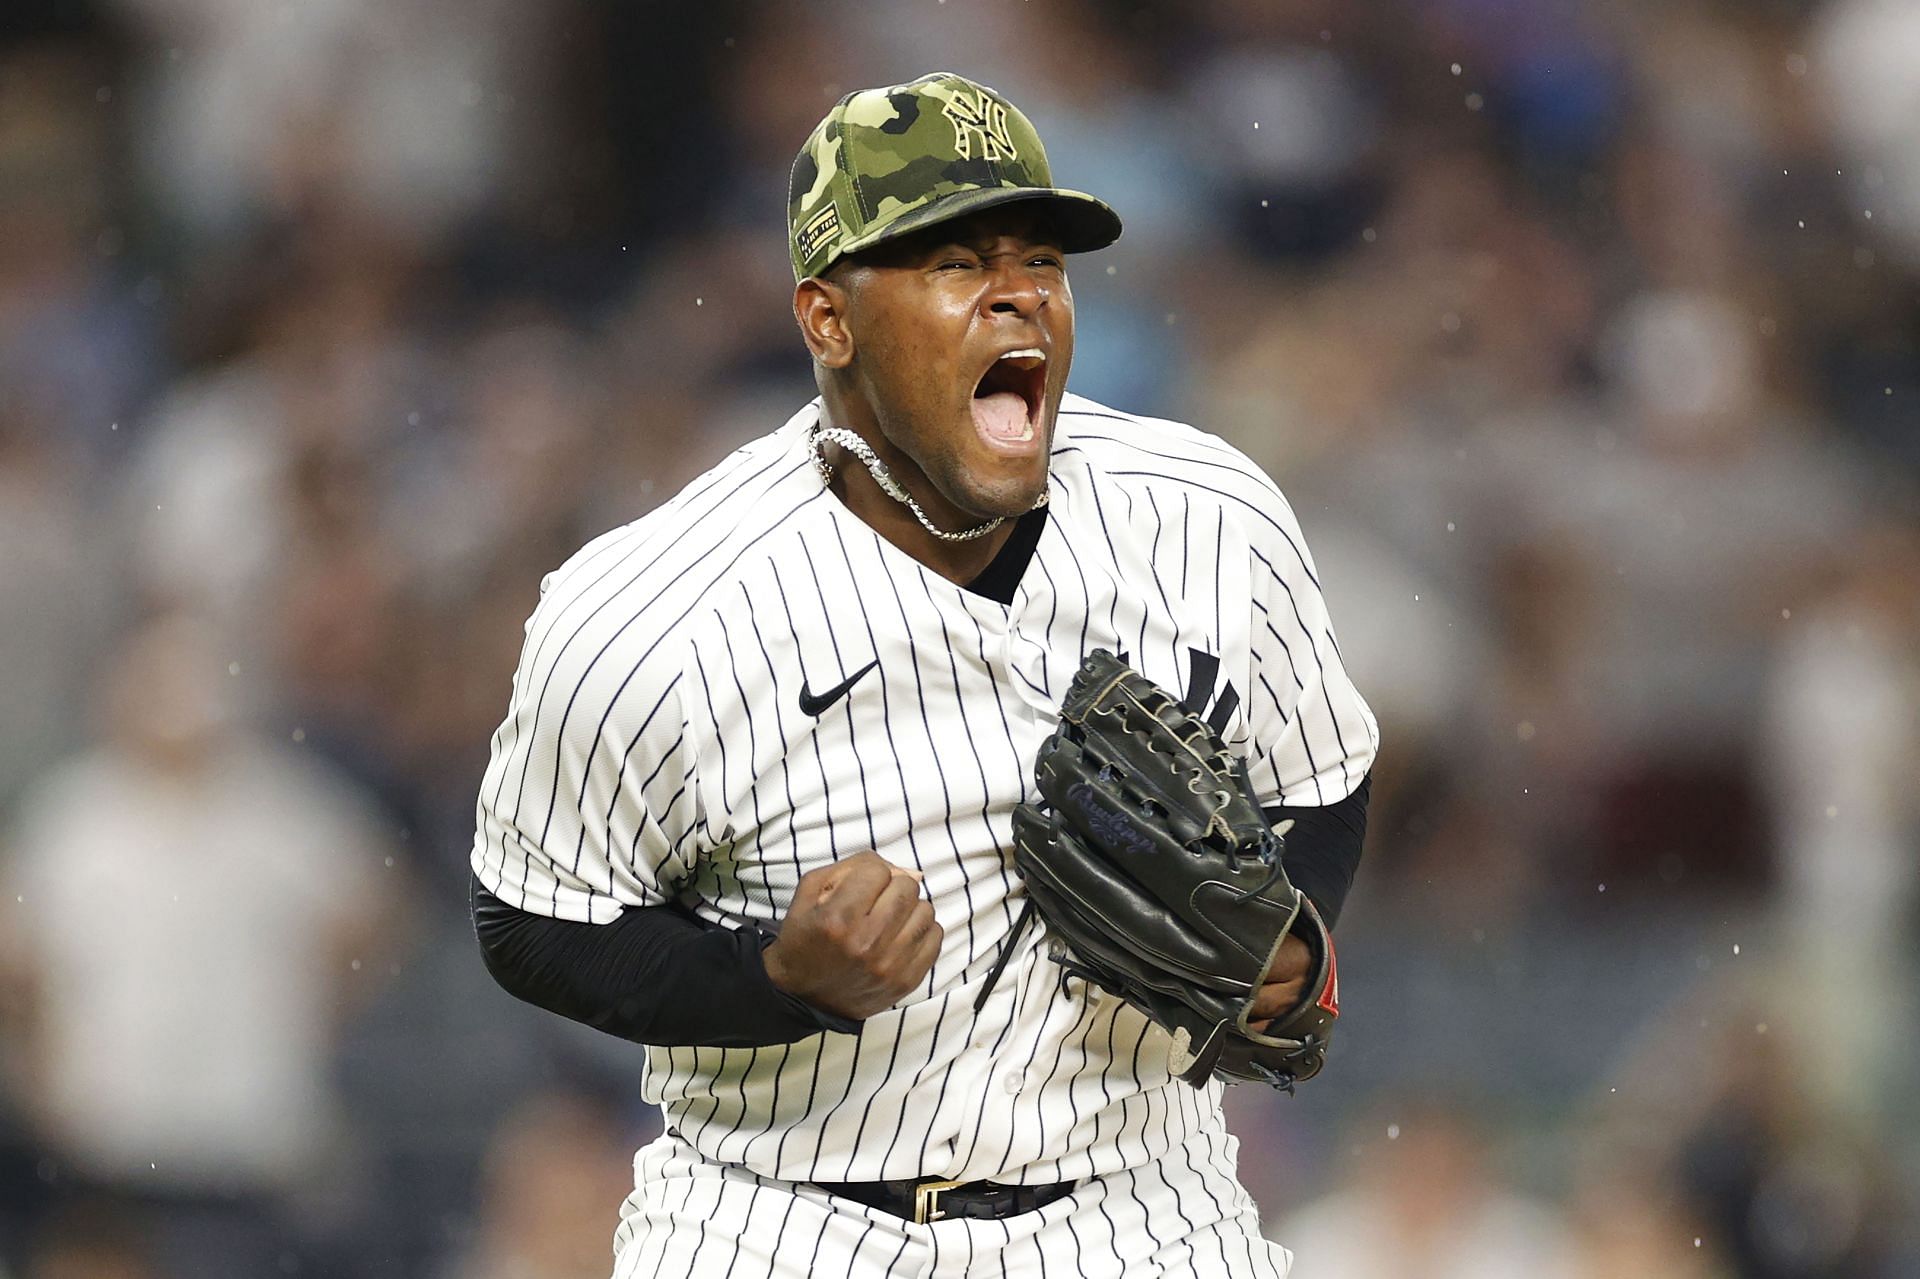 Who is Luis Severino's wife Rosmaly Severino? A closer look into the  personal life of injured Yankees pitcher